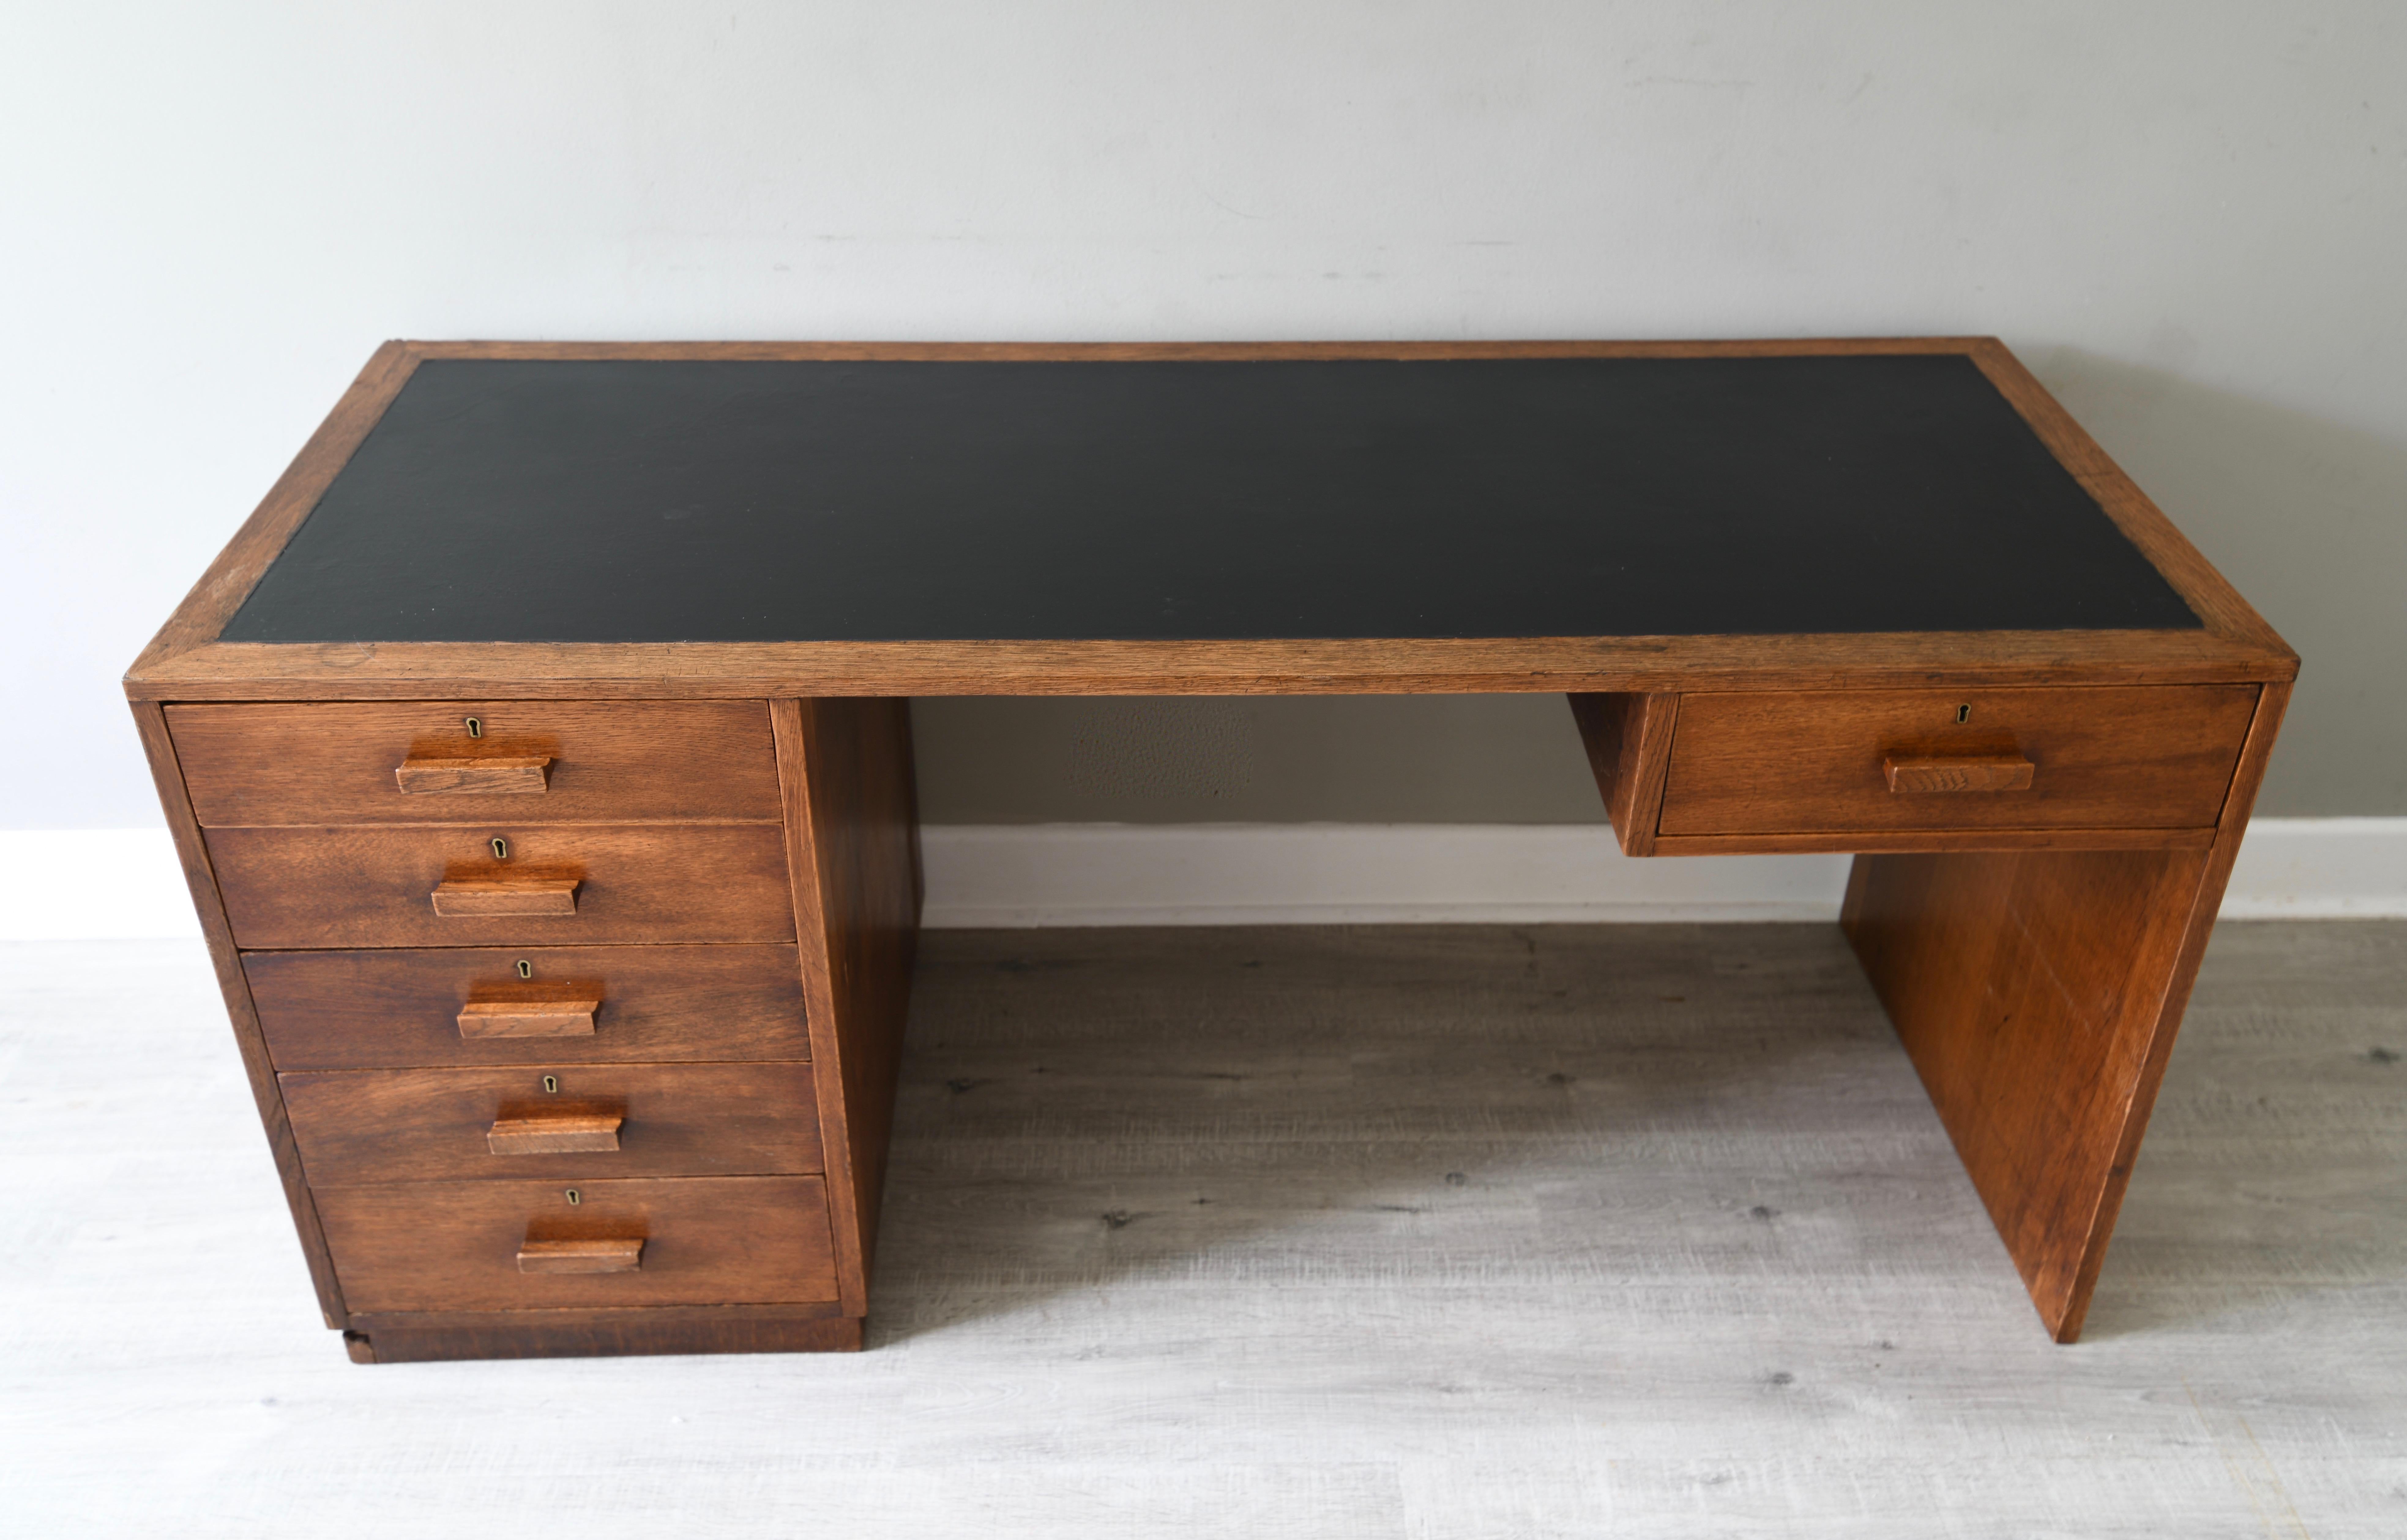 Stunning modernist desk dating from 1930s this desk is striking by its simplicity.


Single right hand drawer with 5 graduated on the left side. All with original locks sadly no key. It has a canvas top and a patinated oak trim.


Clearly